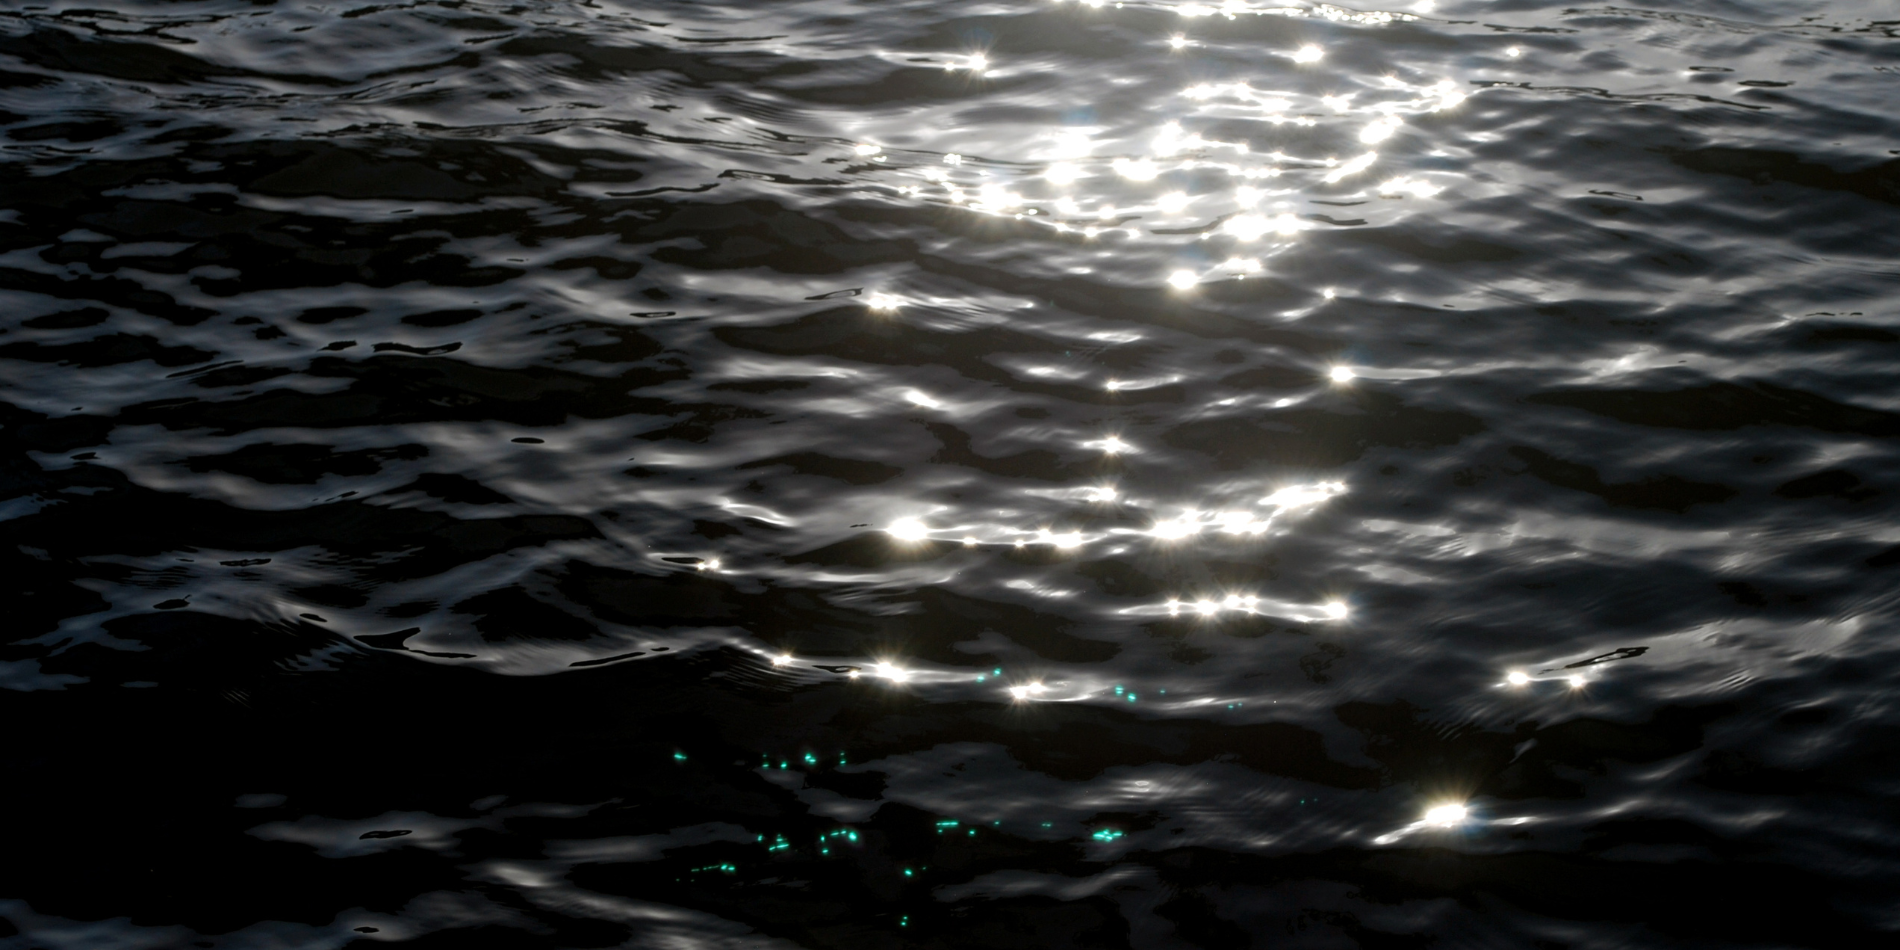 A photo of sun shining on gently rippling water.